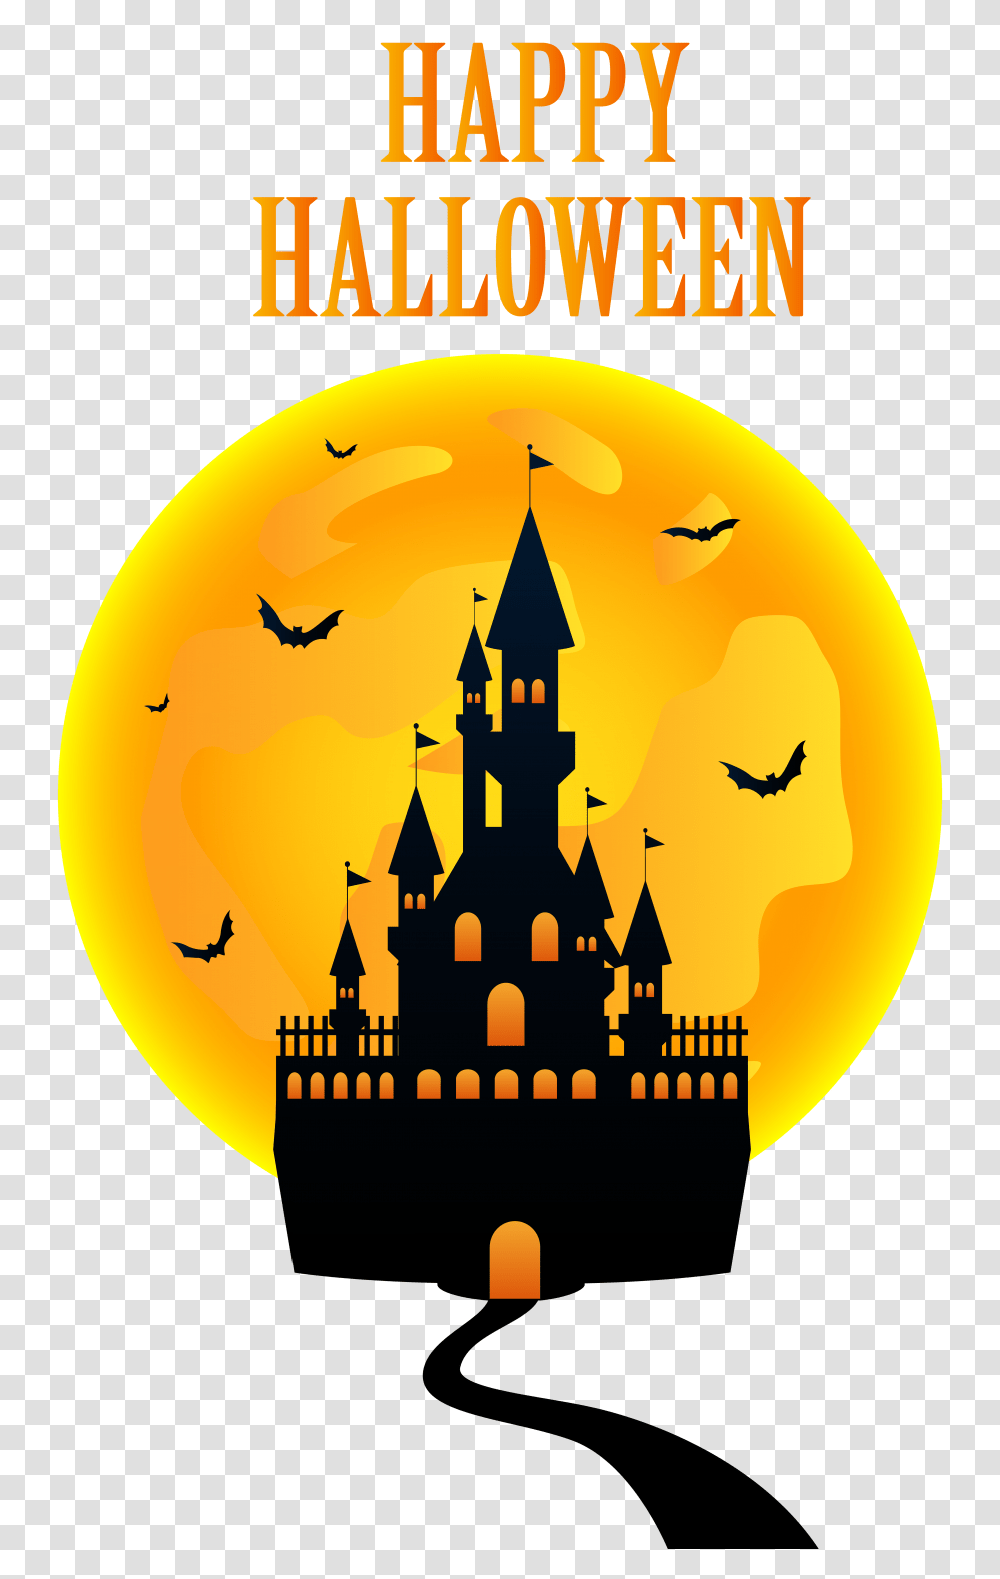 Happy Halloween With Castle Clip Art Gallery, Diwali, Architecture, Building Transparent Png